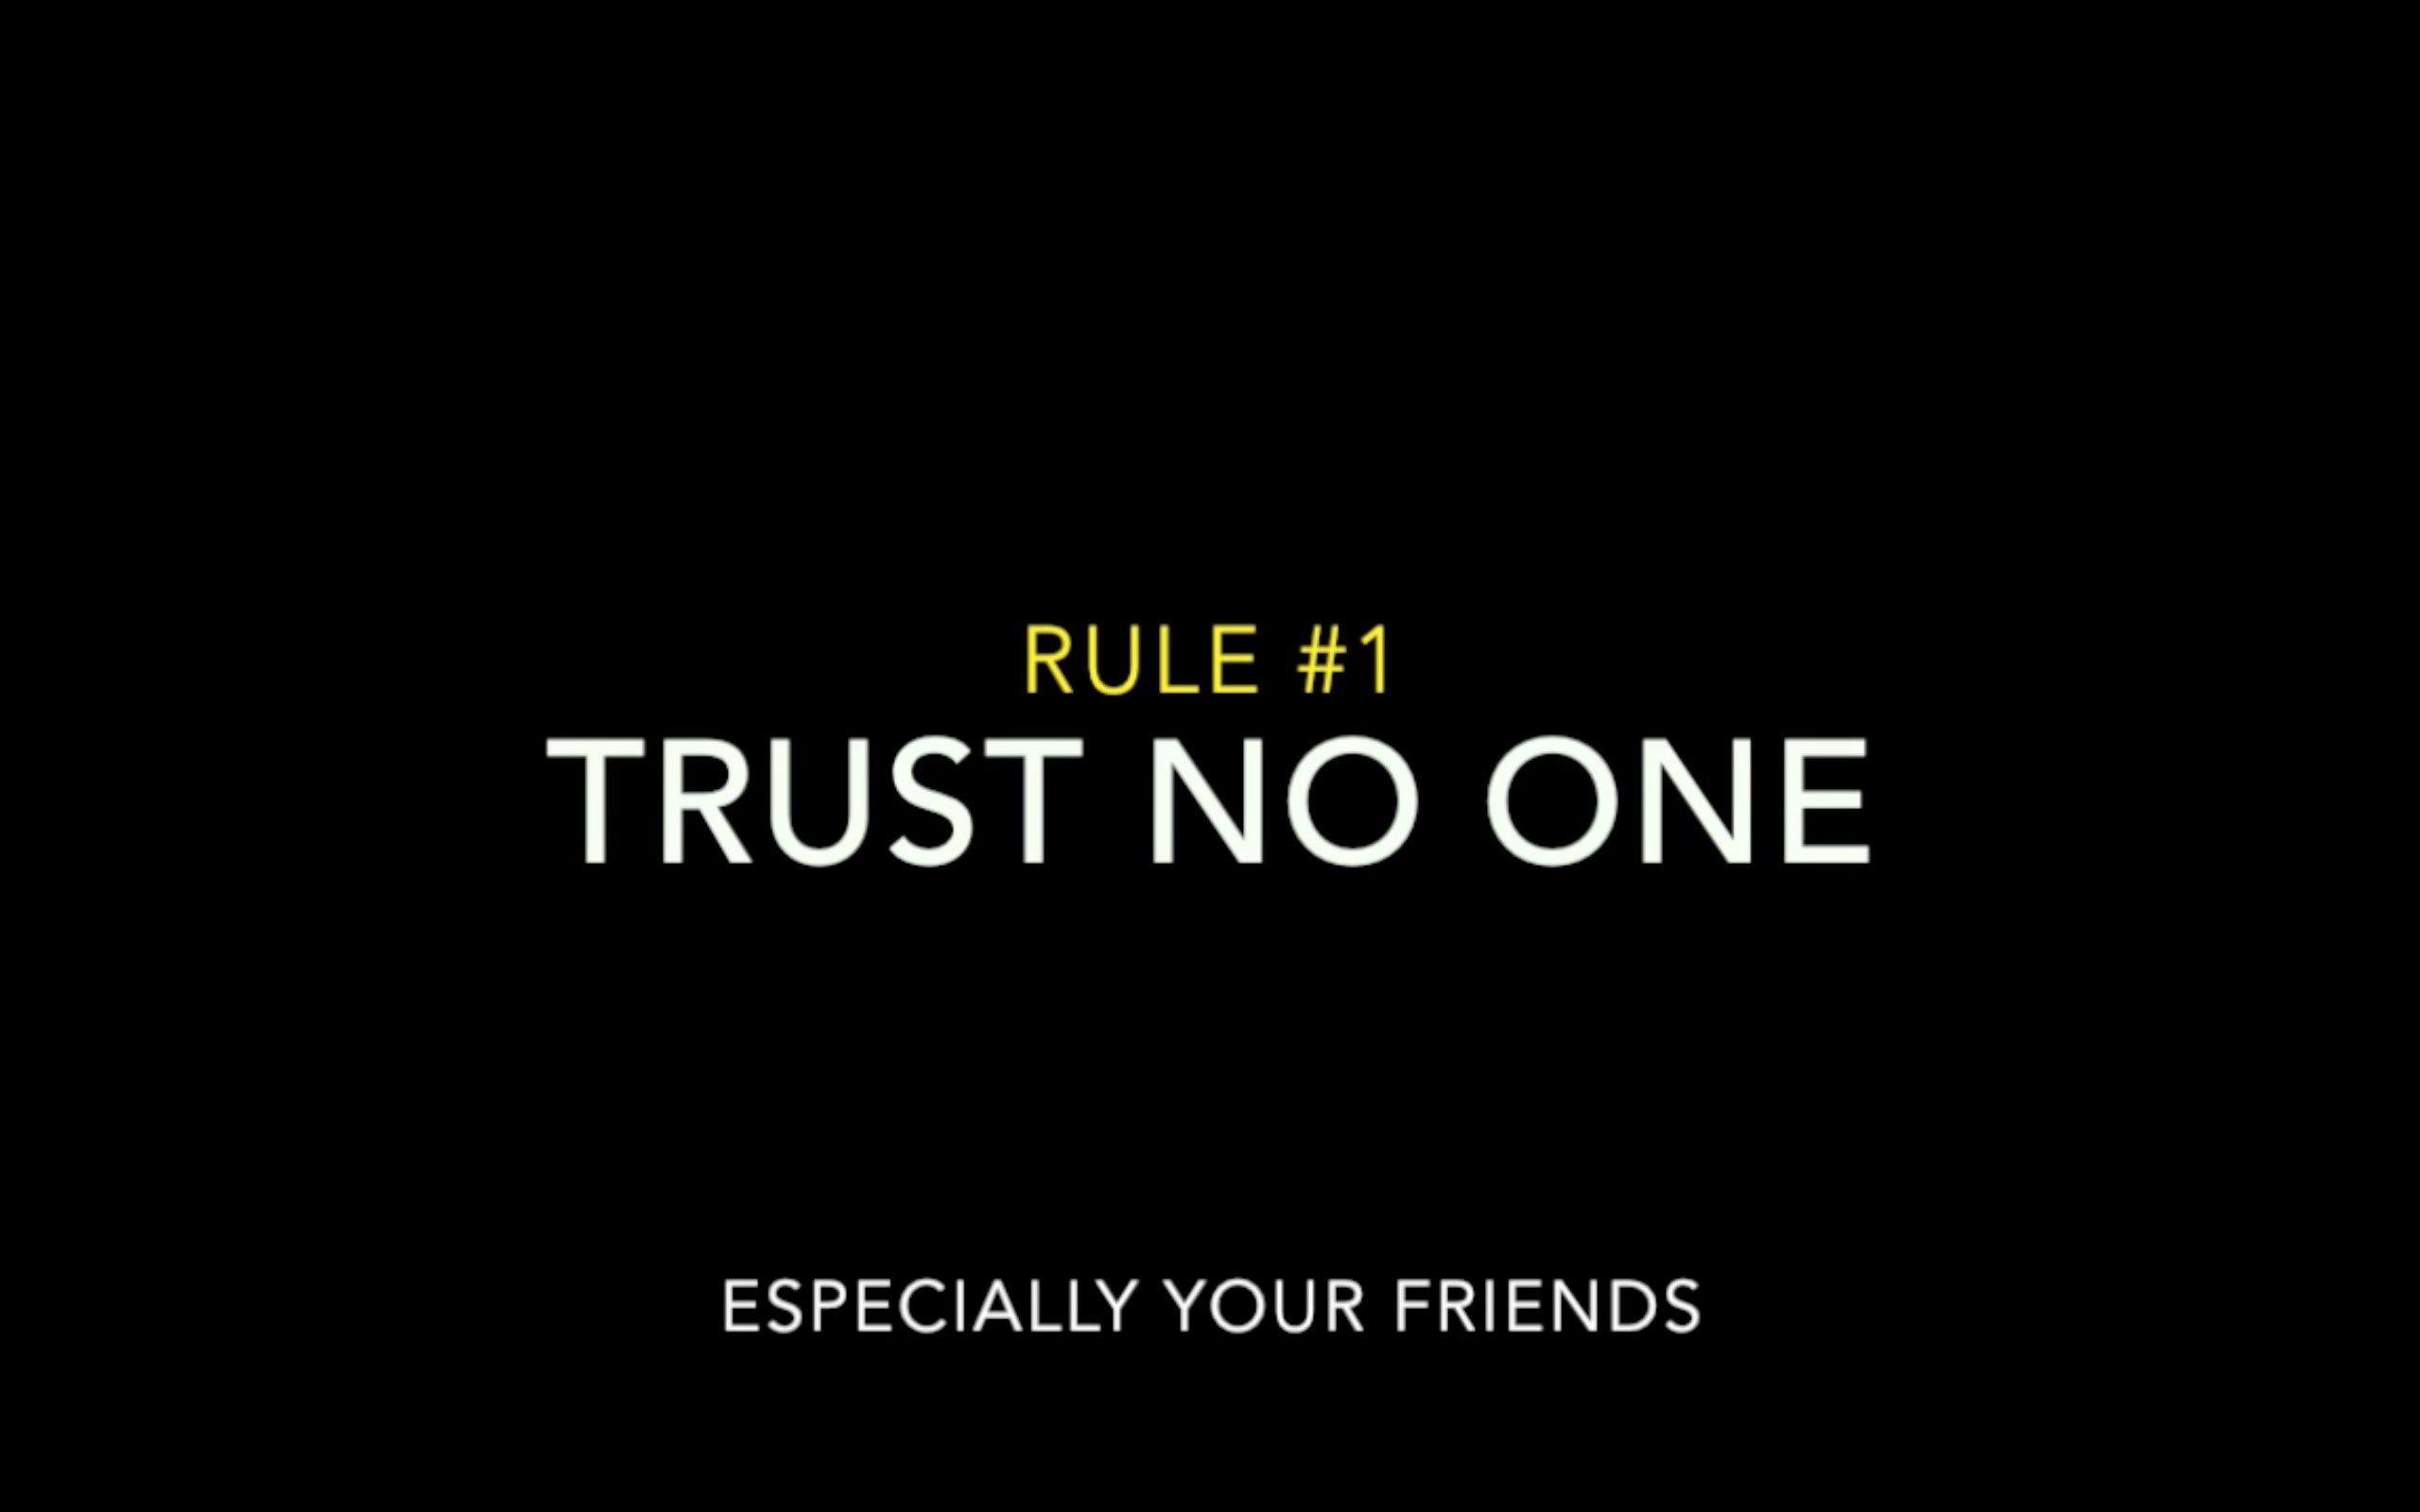 Awesome Trust No One Wallpapers free download hd wallpapers for pc